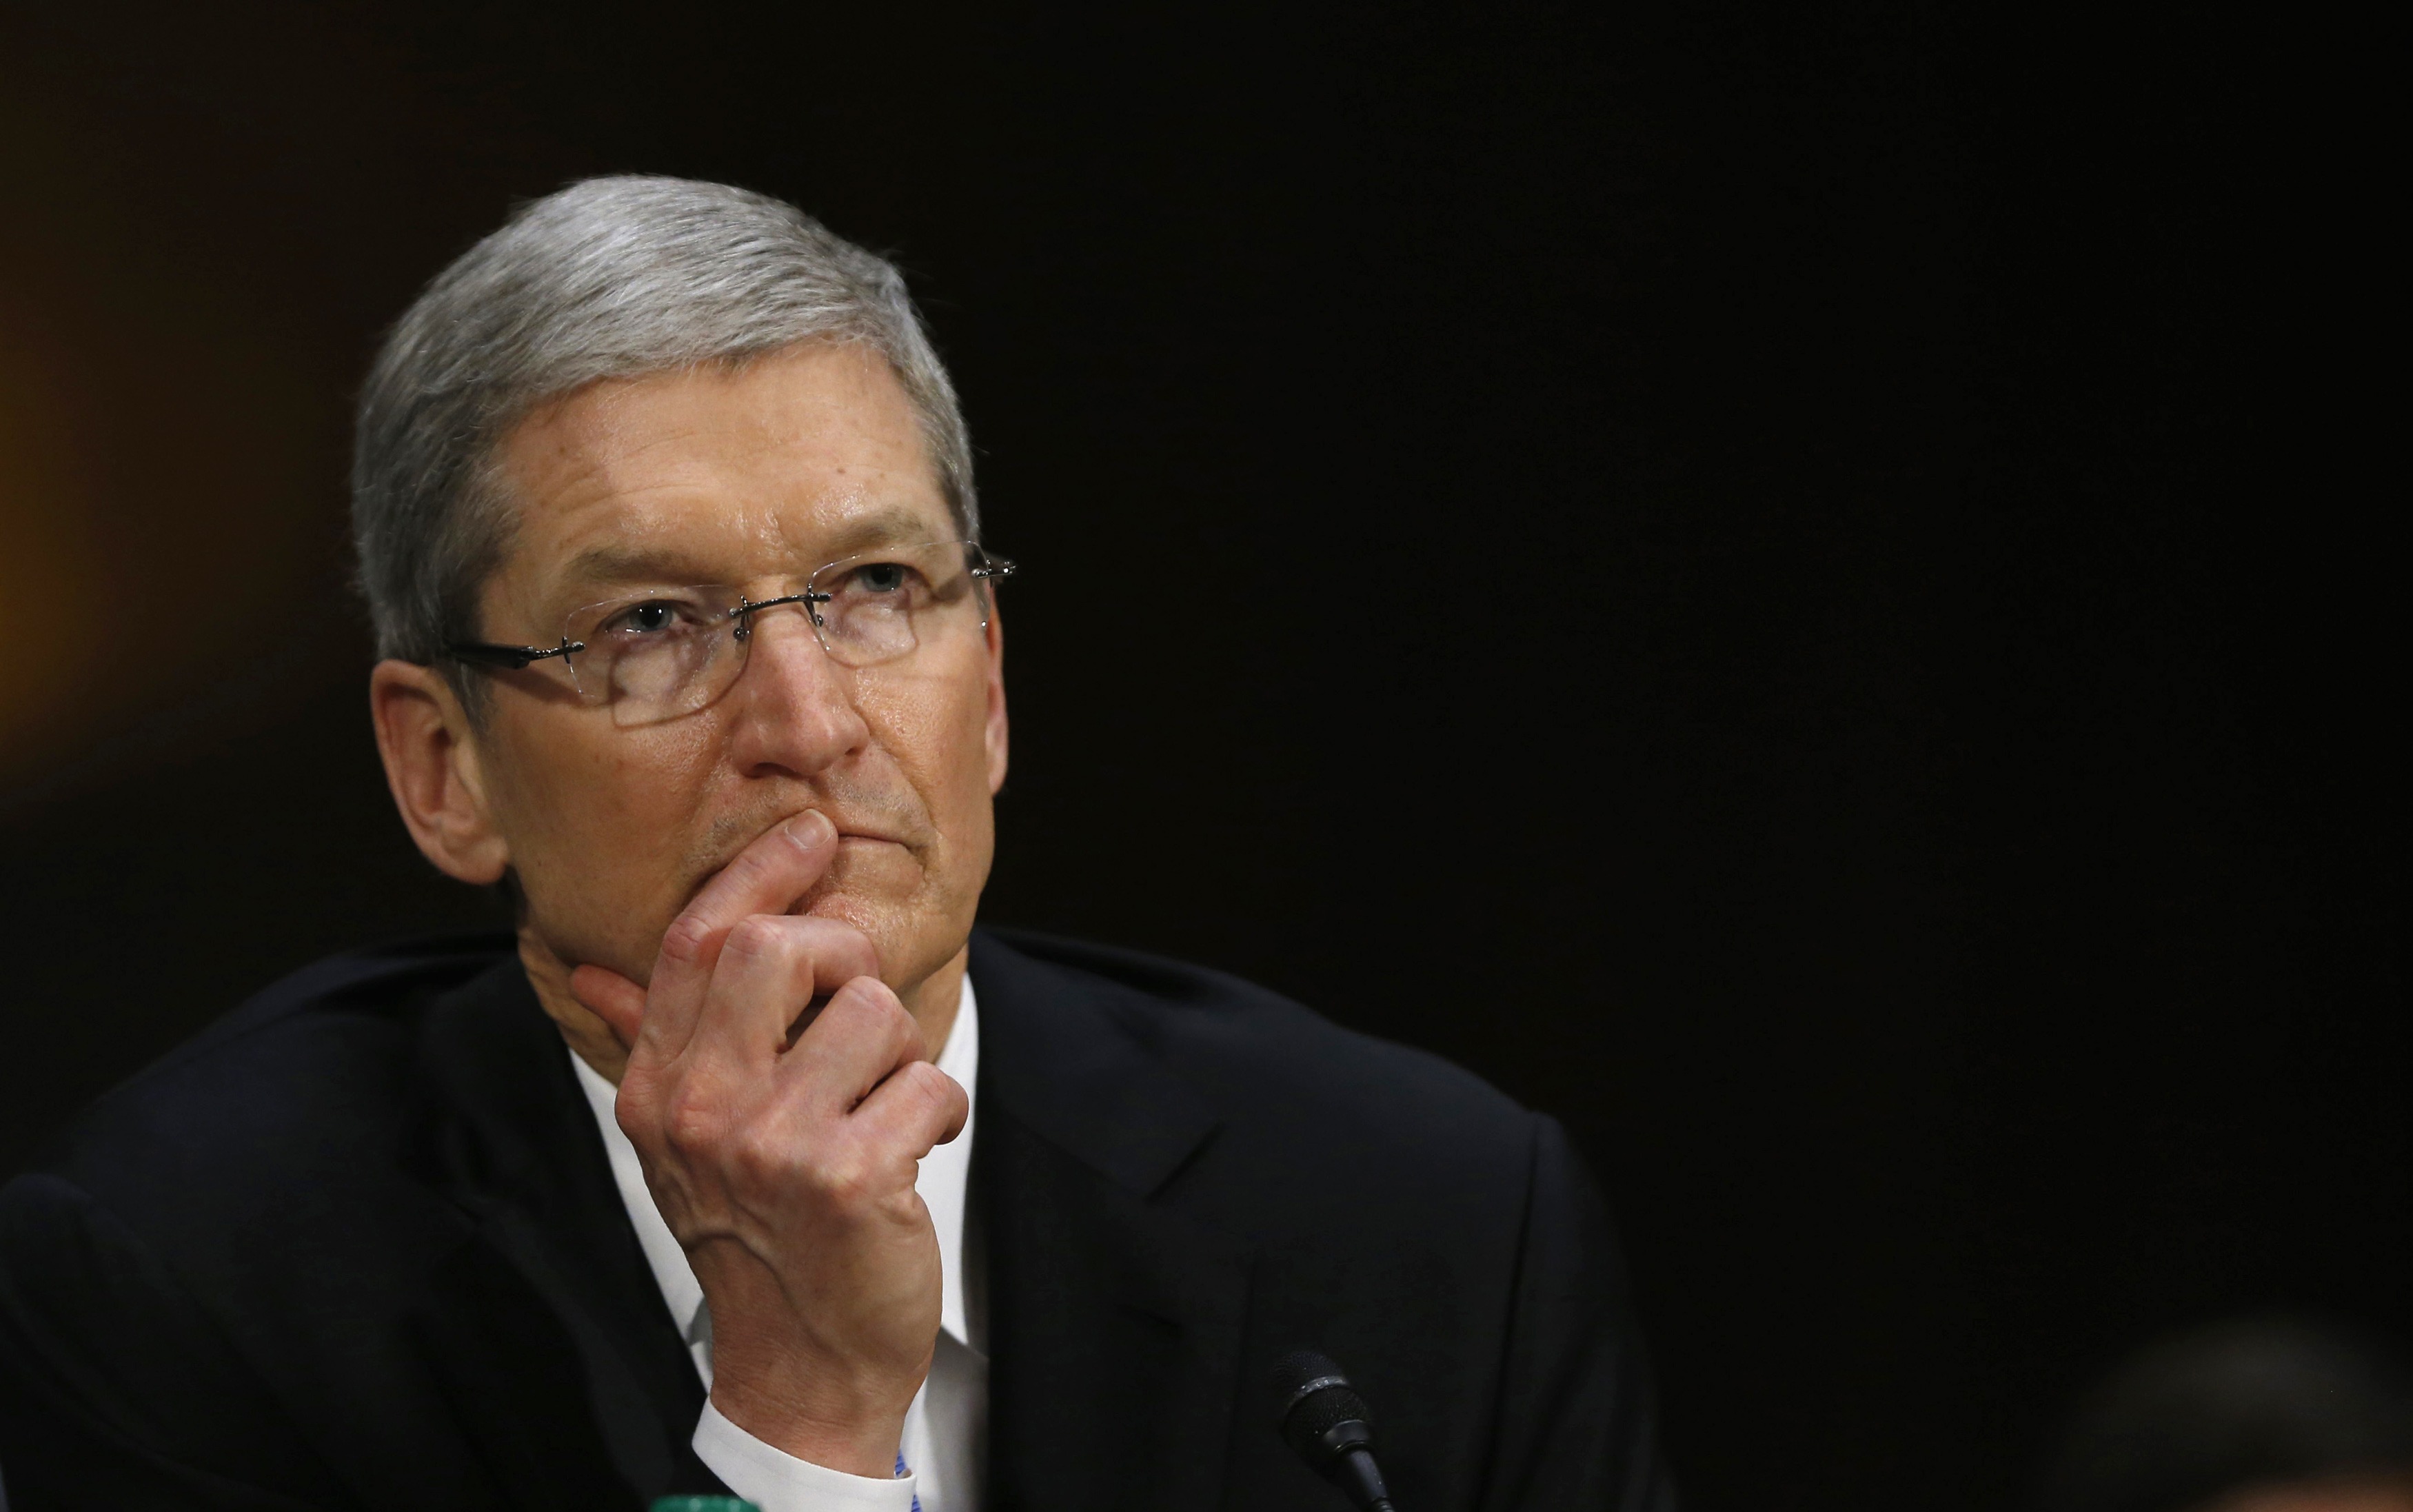 Apple CEO backs workplace protection bill for gays